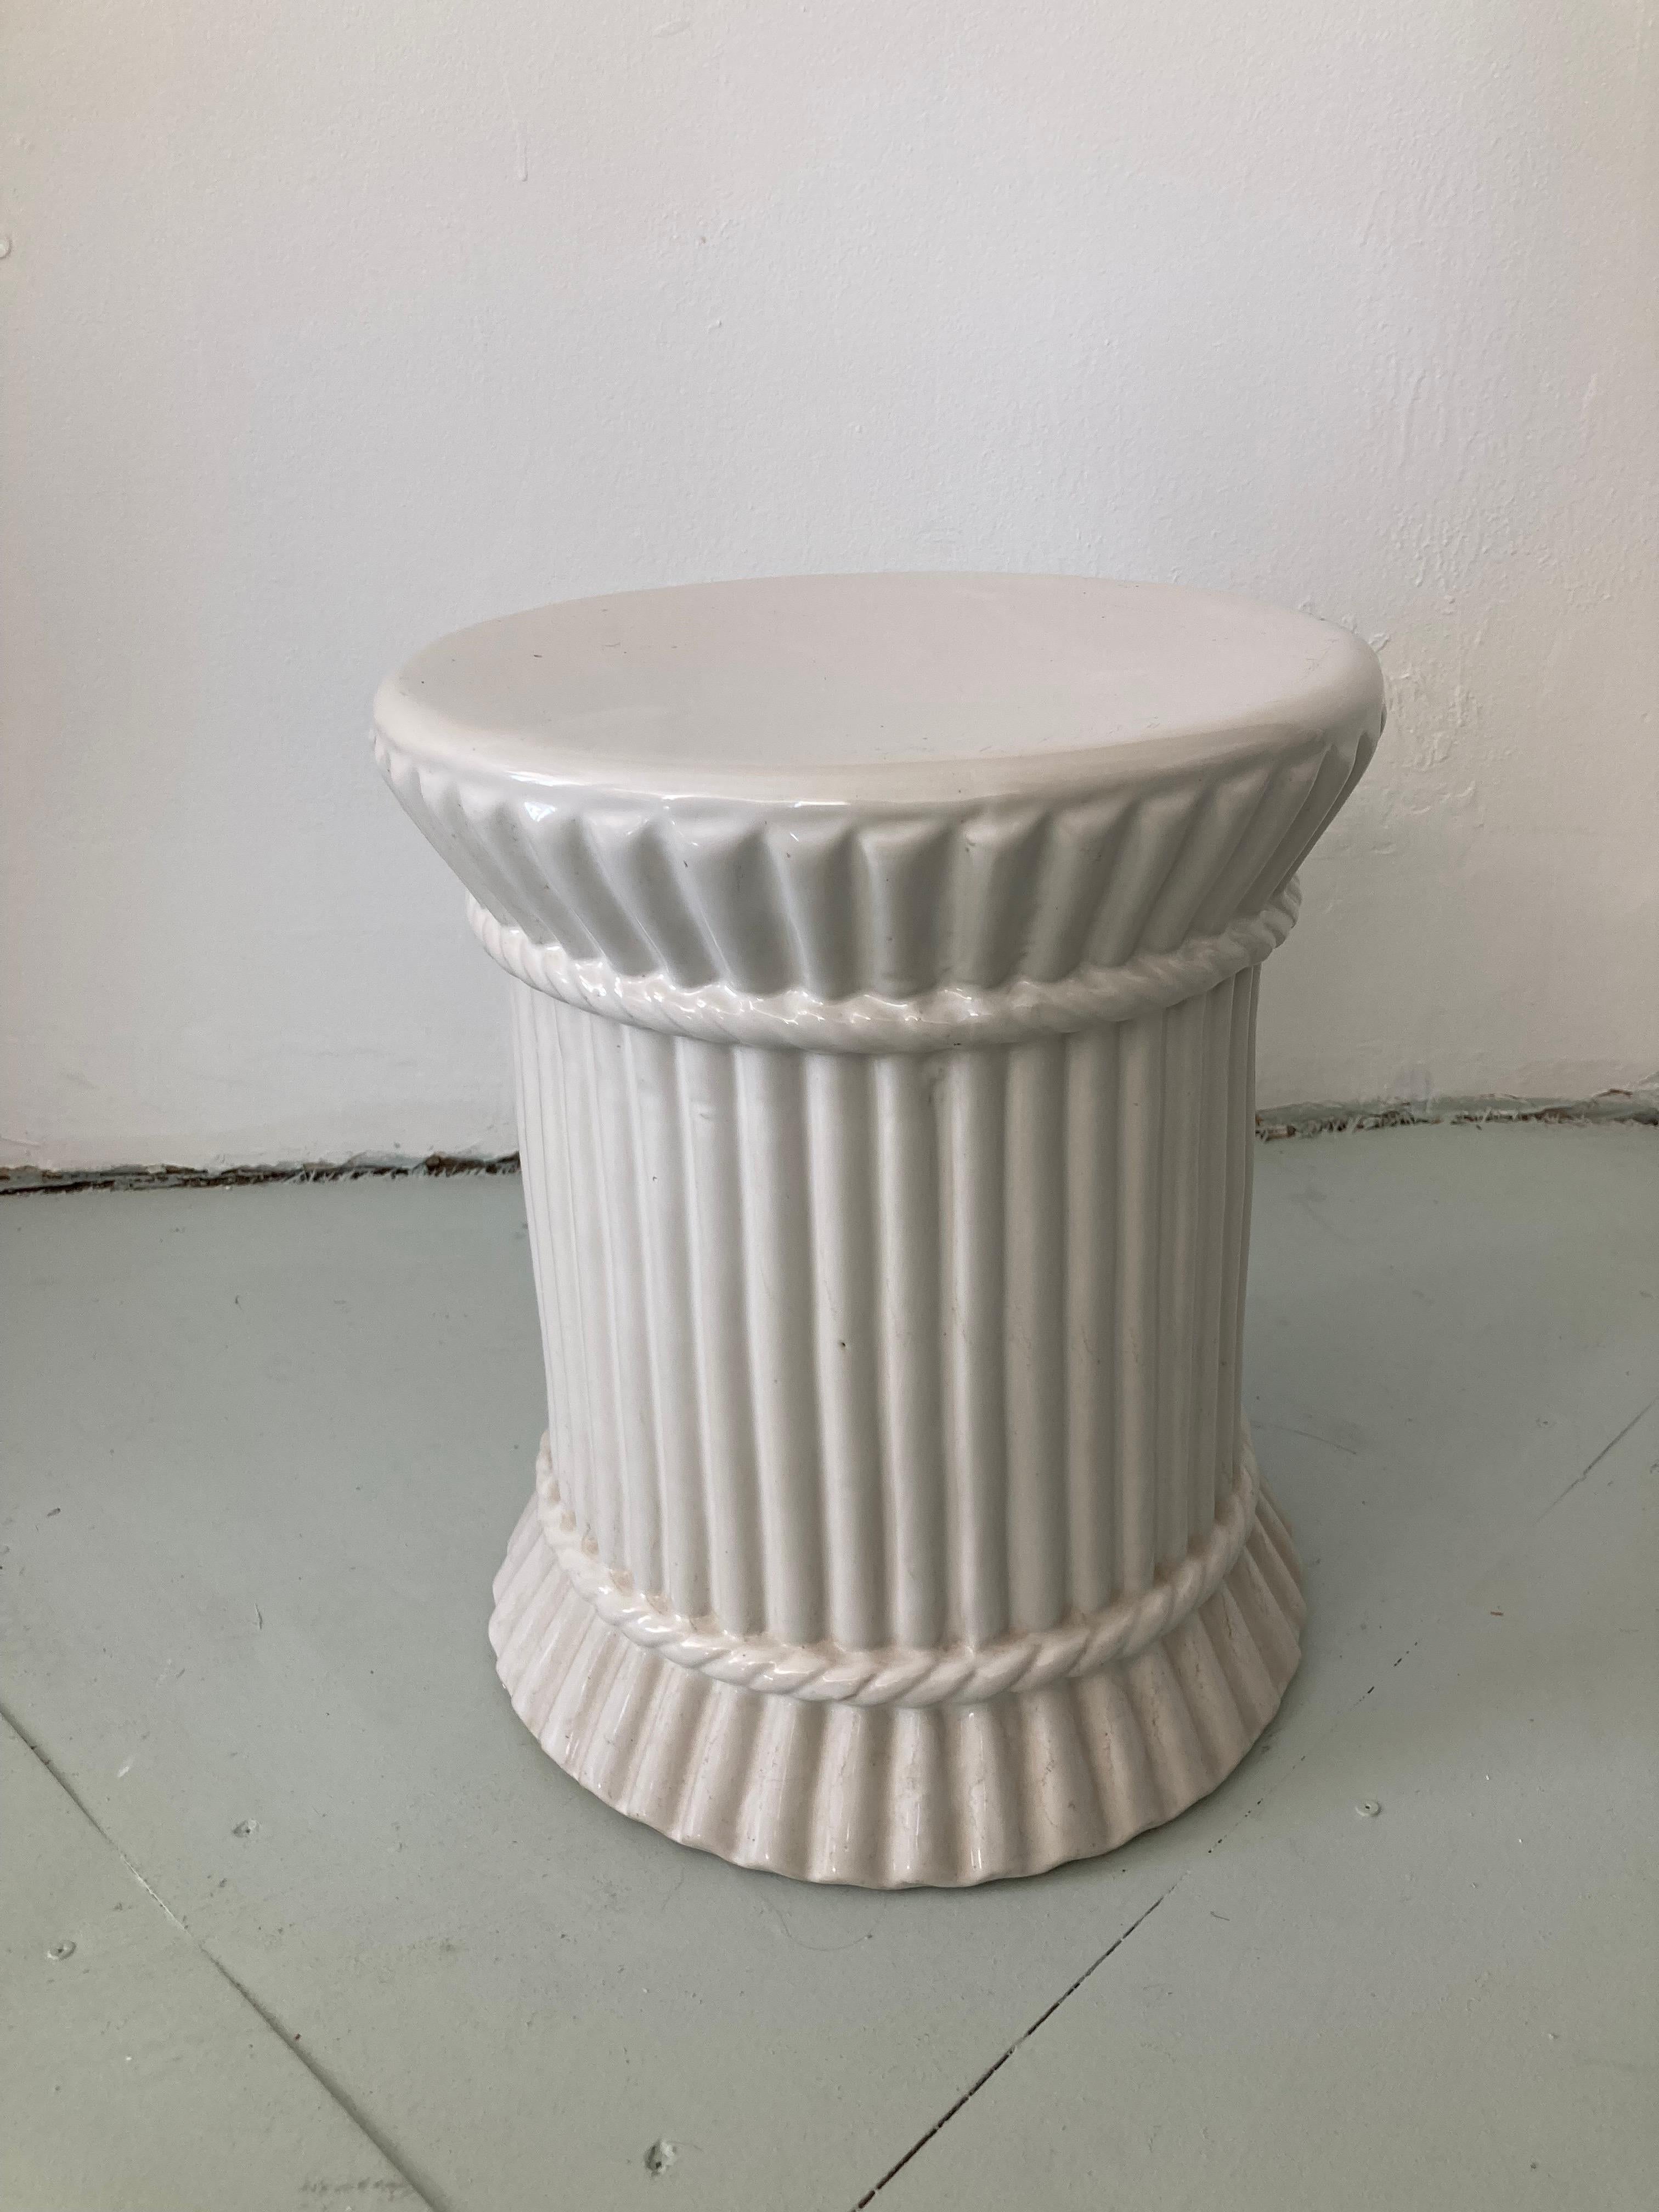 Classic Architectural White Glazed Ceramic Garden Seat in a circular form with simple details. Add some architectural shapes to your home or garden , use this garden seat as a cocktail table or extra seat when needed. 